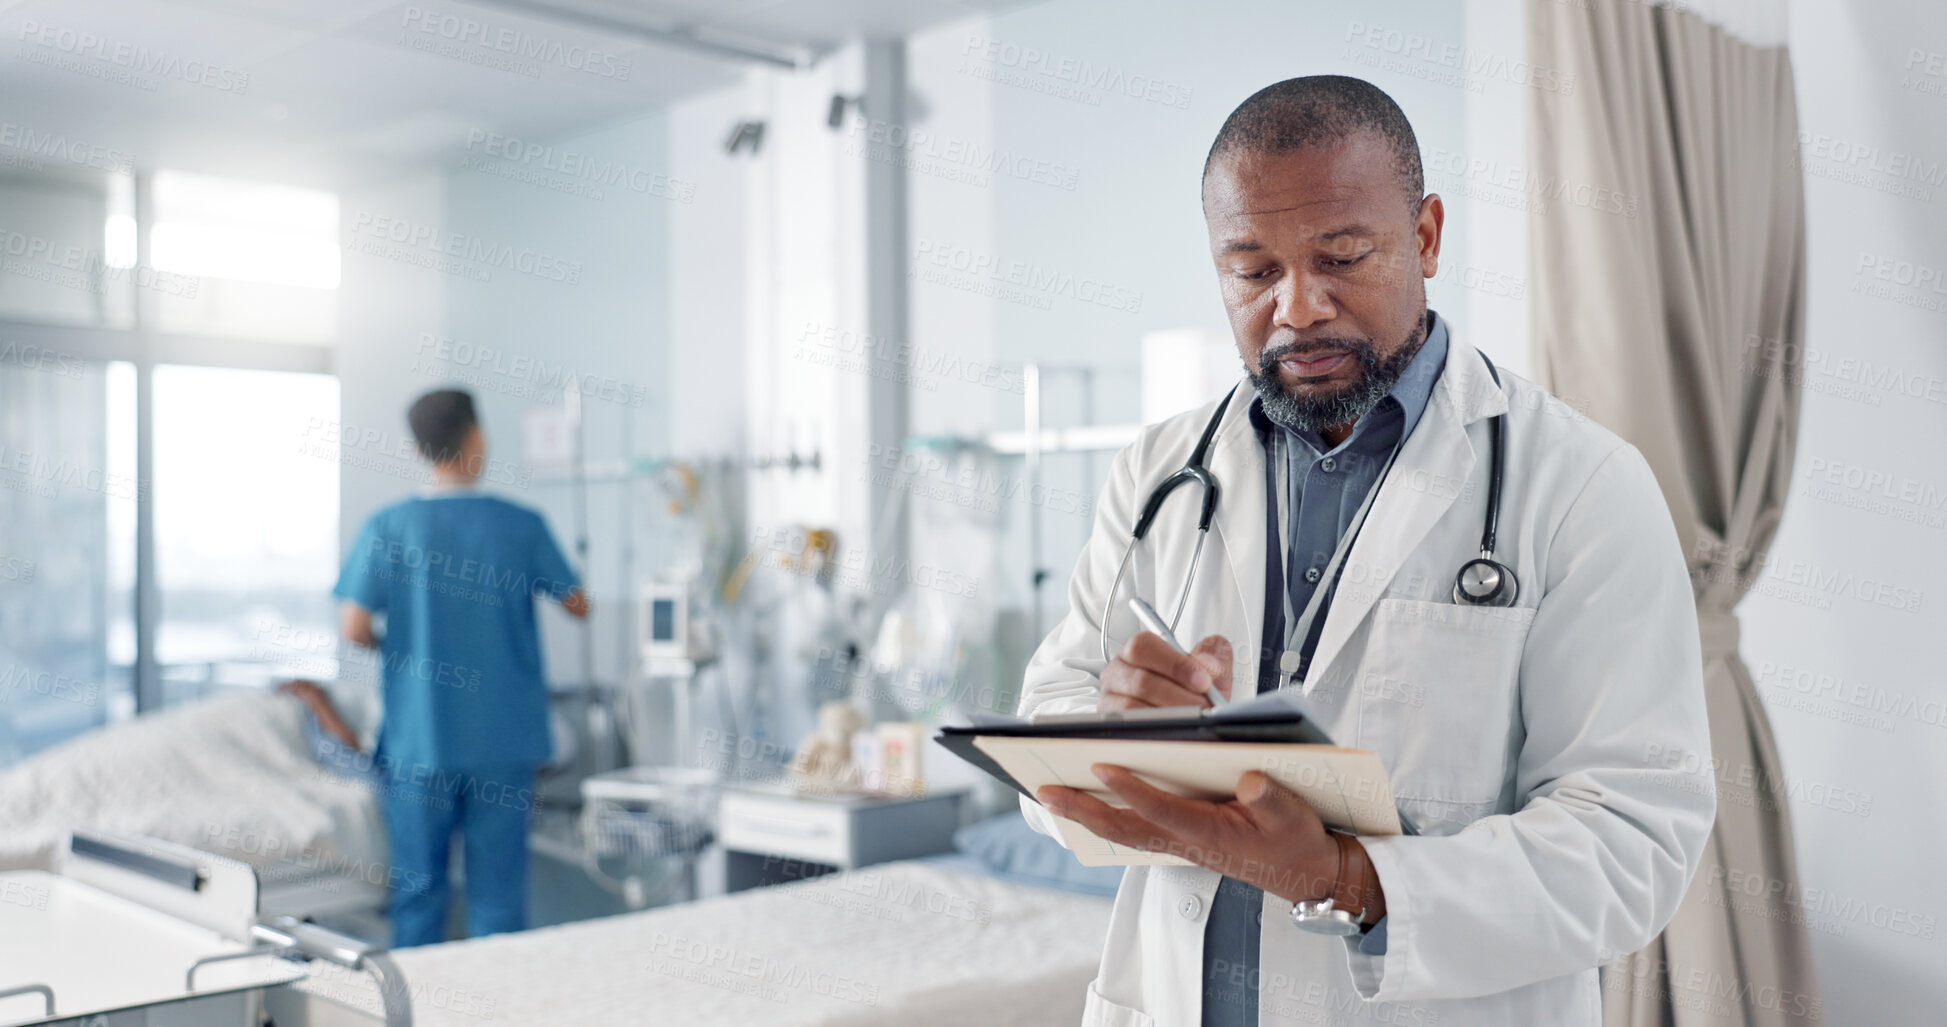 Buy stock photo Internet, black man or doctor with a tablet, typing or connection with online results, healthcare or website information. African person, worker or medical professional with tech, surgeon or research